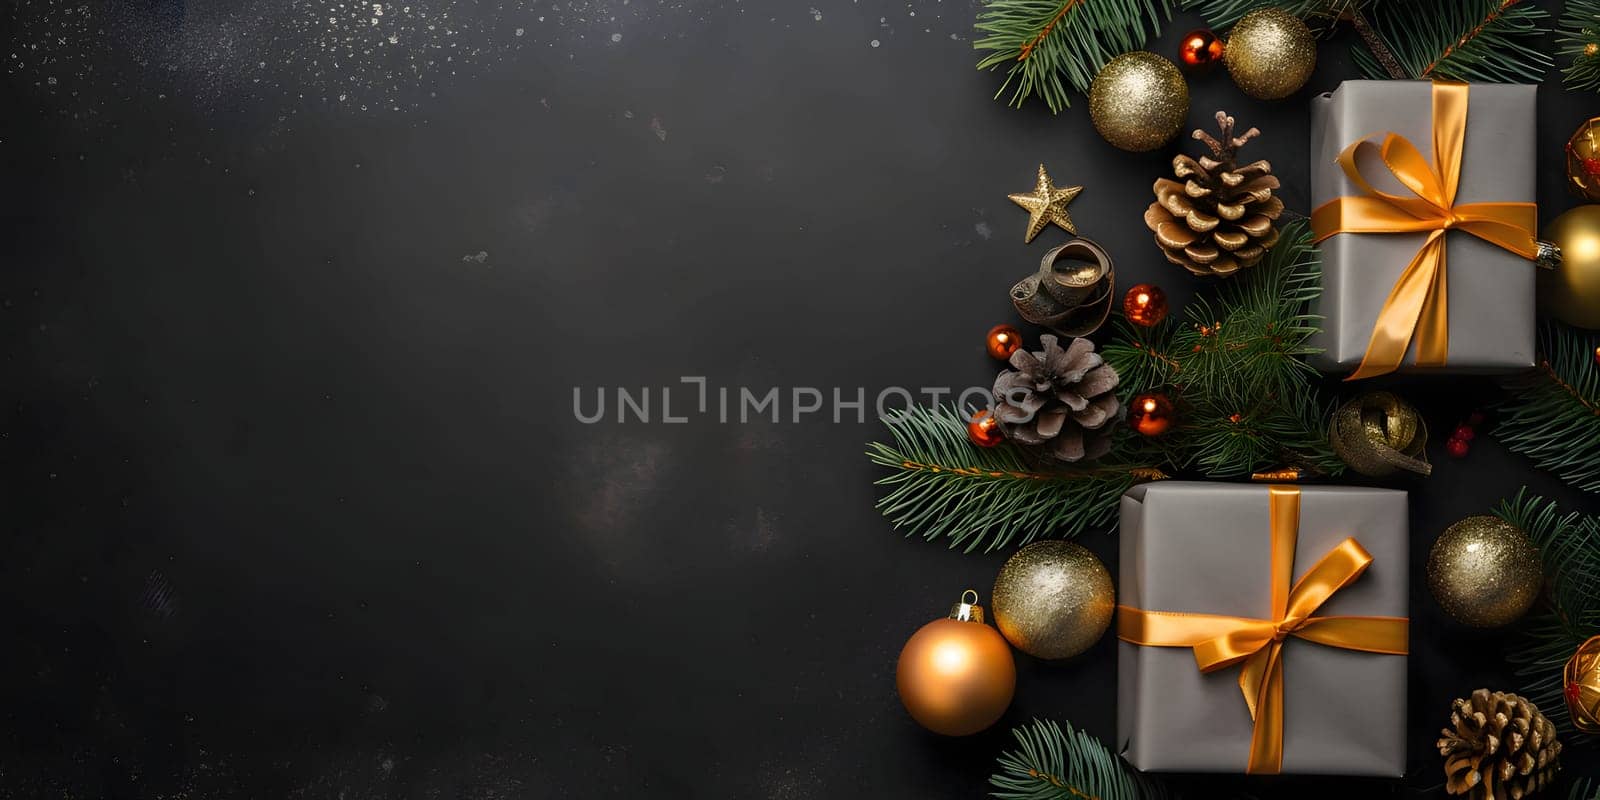 Top view of elegantly arranged gifts, baubles, pinecones, pine branches and Christmas trees on the right.Christmas banner with space for your own content. Gray background color. Blank field for your inscription.